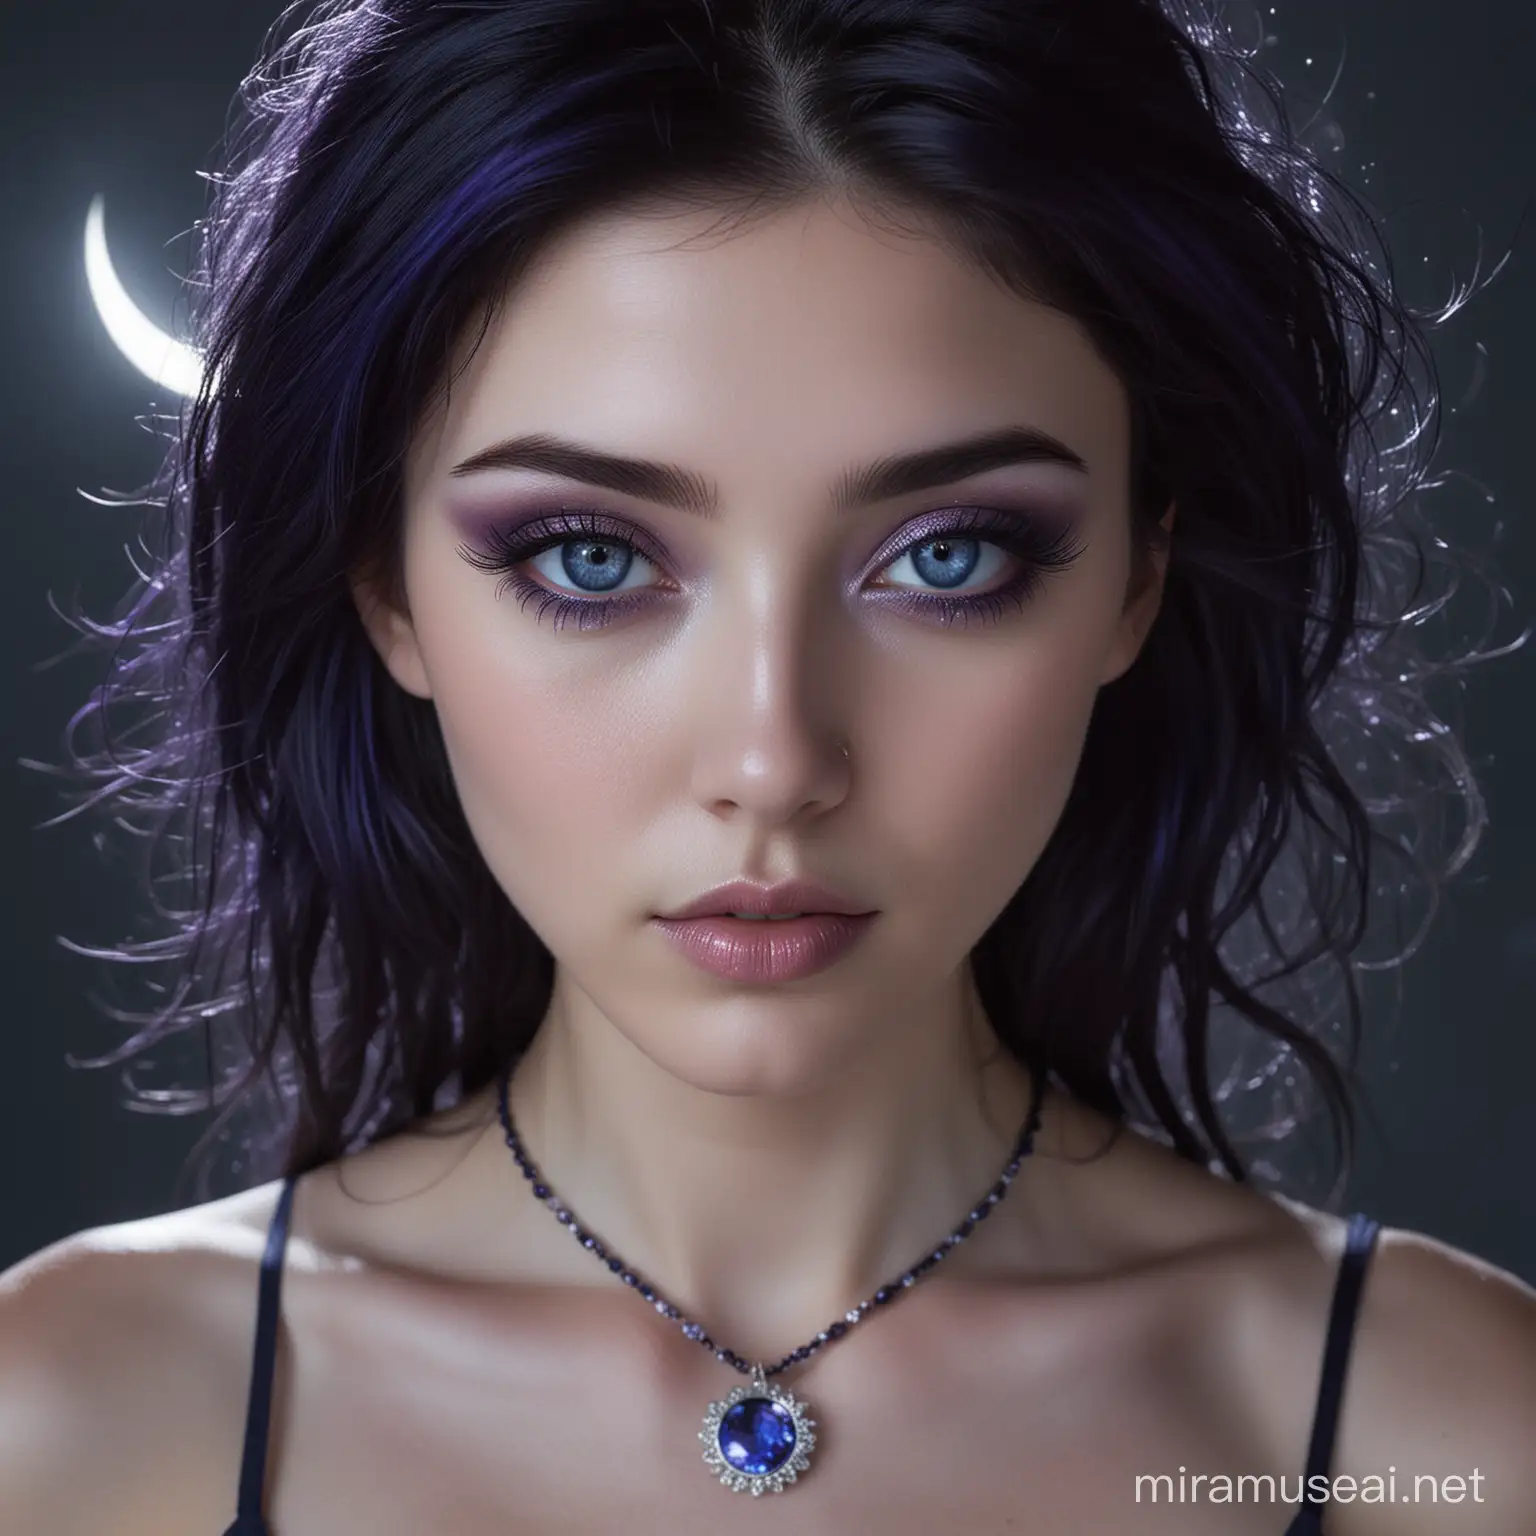  a girl who has black hair with silver streaks. Midnight blue eyes that seemed purple in moonlight, a small Sapphire amulet around her neck, shaped like an eclipse - a silver sun partially obscured by the moon, radiating a blend of purple and midnight blue hues, fair skin, smoky eyeshadow, long lashes, and a symmetrical face, she embodies an aura of mystery and elegance.